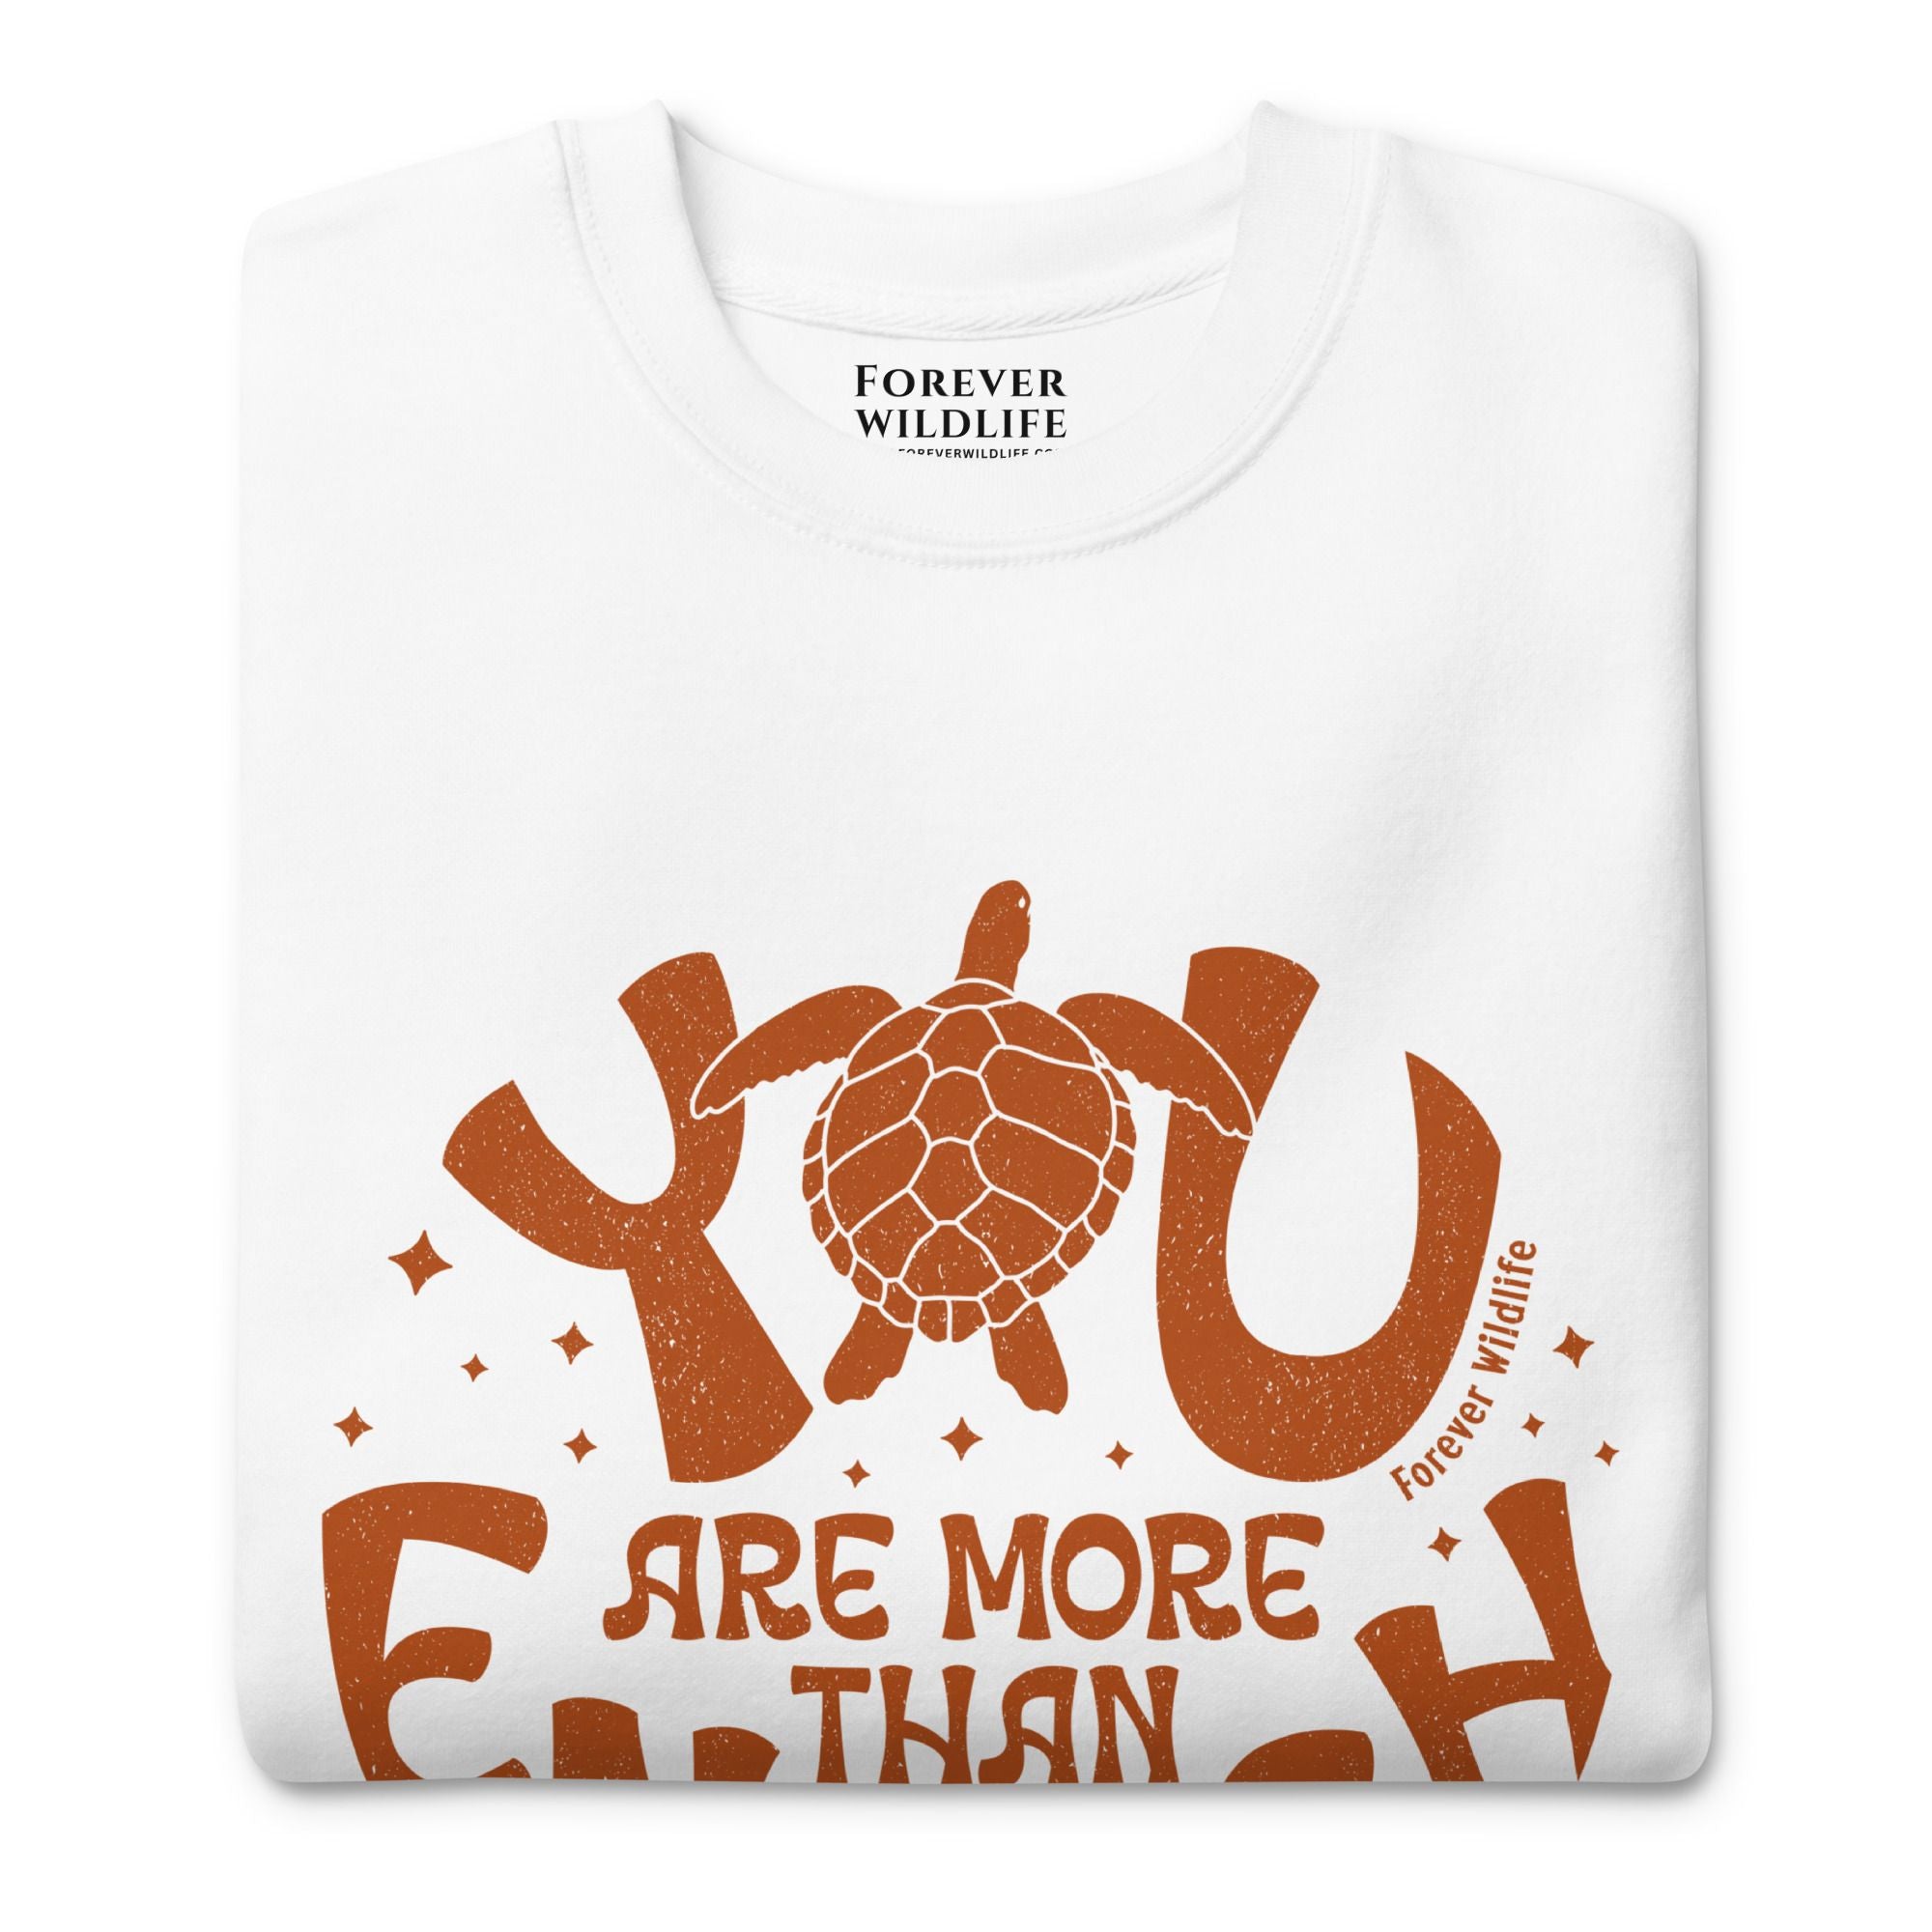 Sea Turtle Sweatshirt in White-Premium Wildlife Animal Inspiration Sweatshirt Design with 'You Are More Than Enough' text, part of Wildlife Sweatshirts & Clothing from Forever Wildlife.